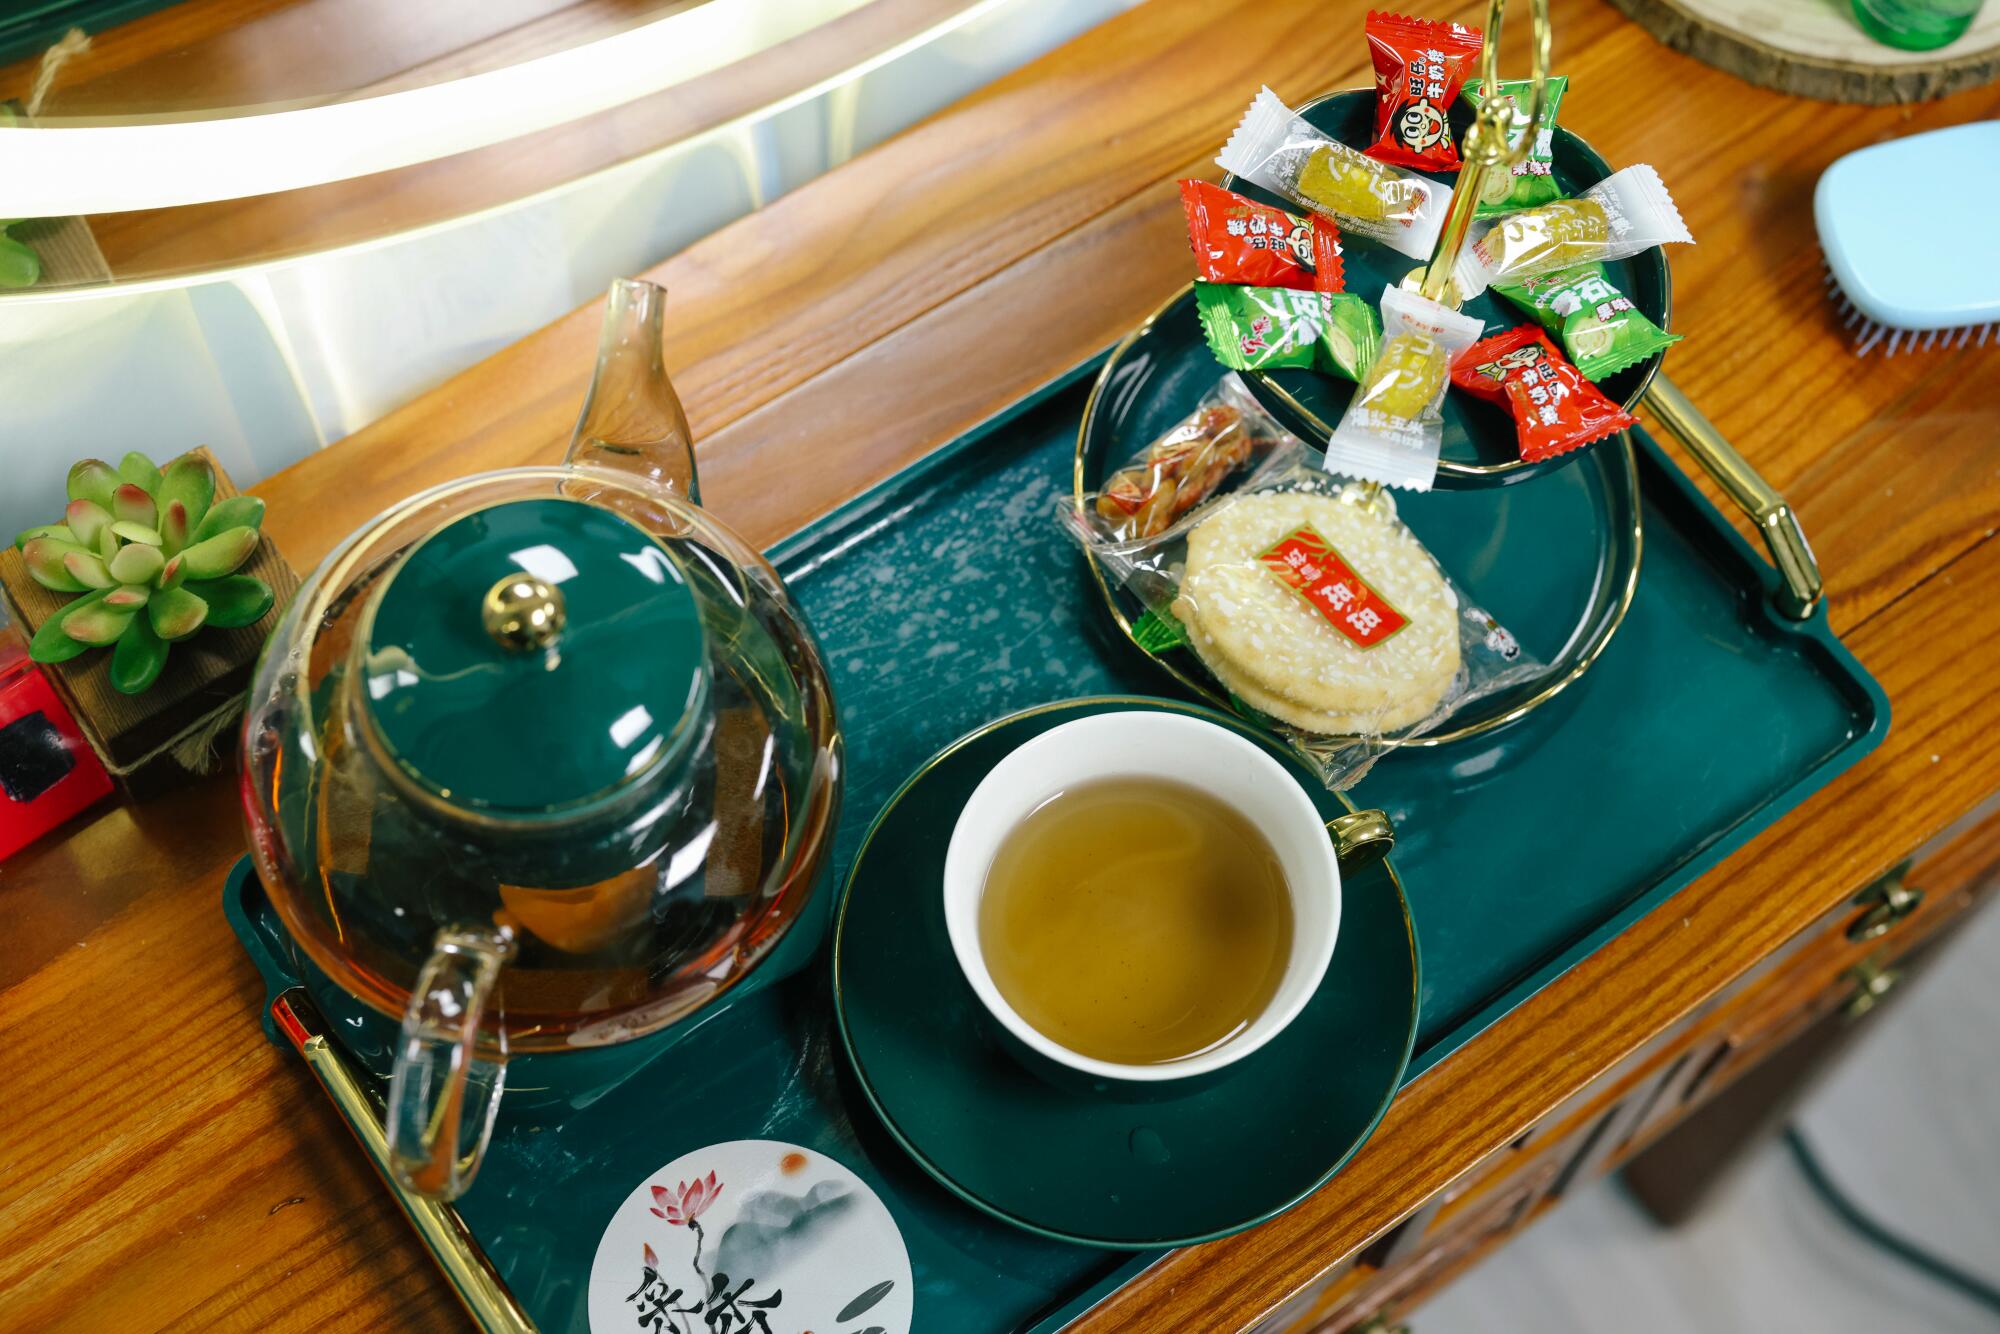 Tea and light snacks are offered after cleansing and before blasting at Cai Xiang Ge.